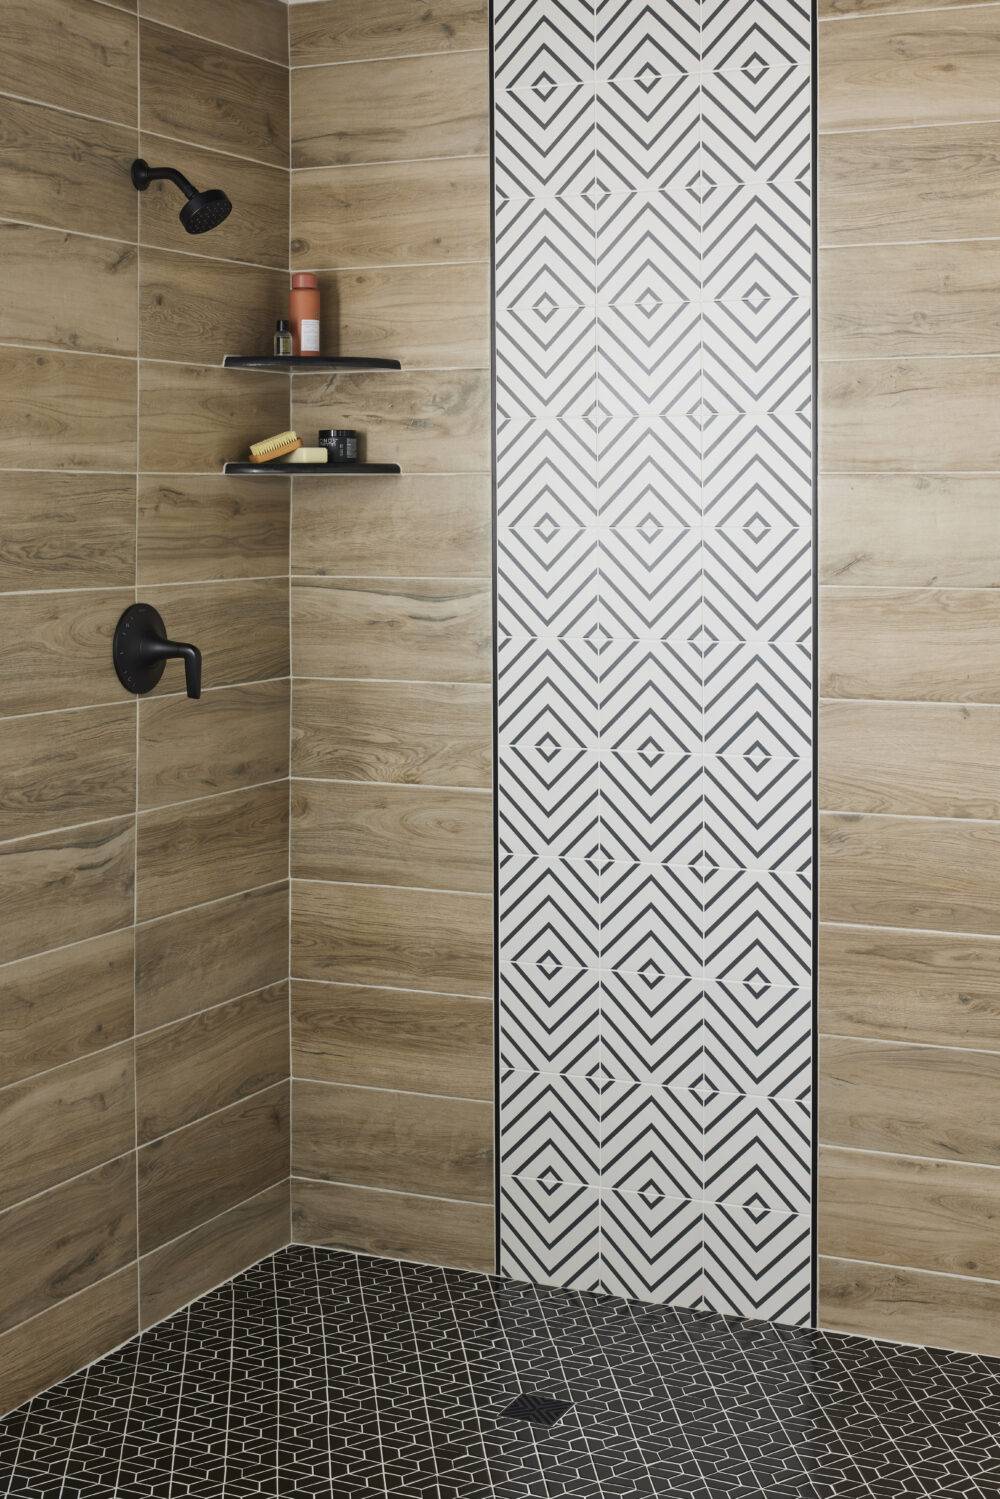 This contemporary shower features wood-look porcelain tile and a band of white with black lined diamond-patterned tile and black  half-hexagon mosaic tile floor.